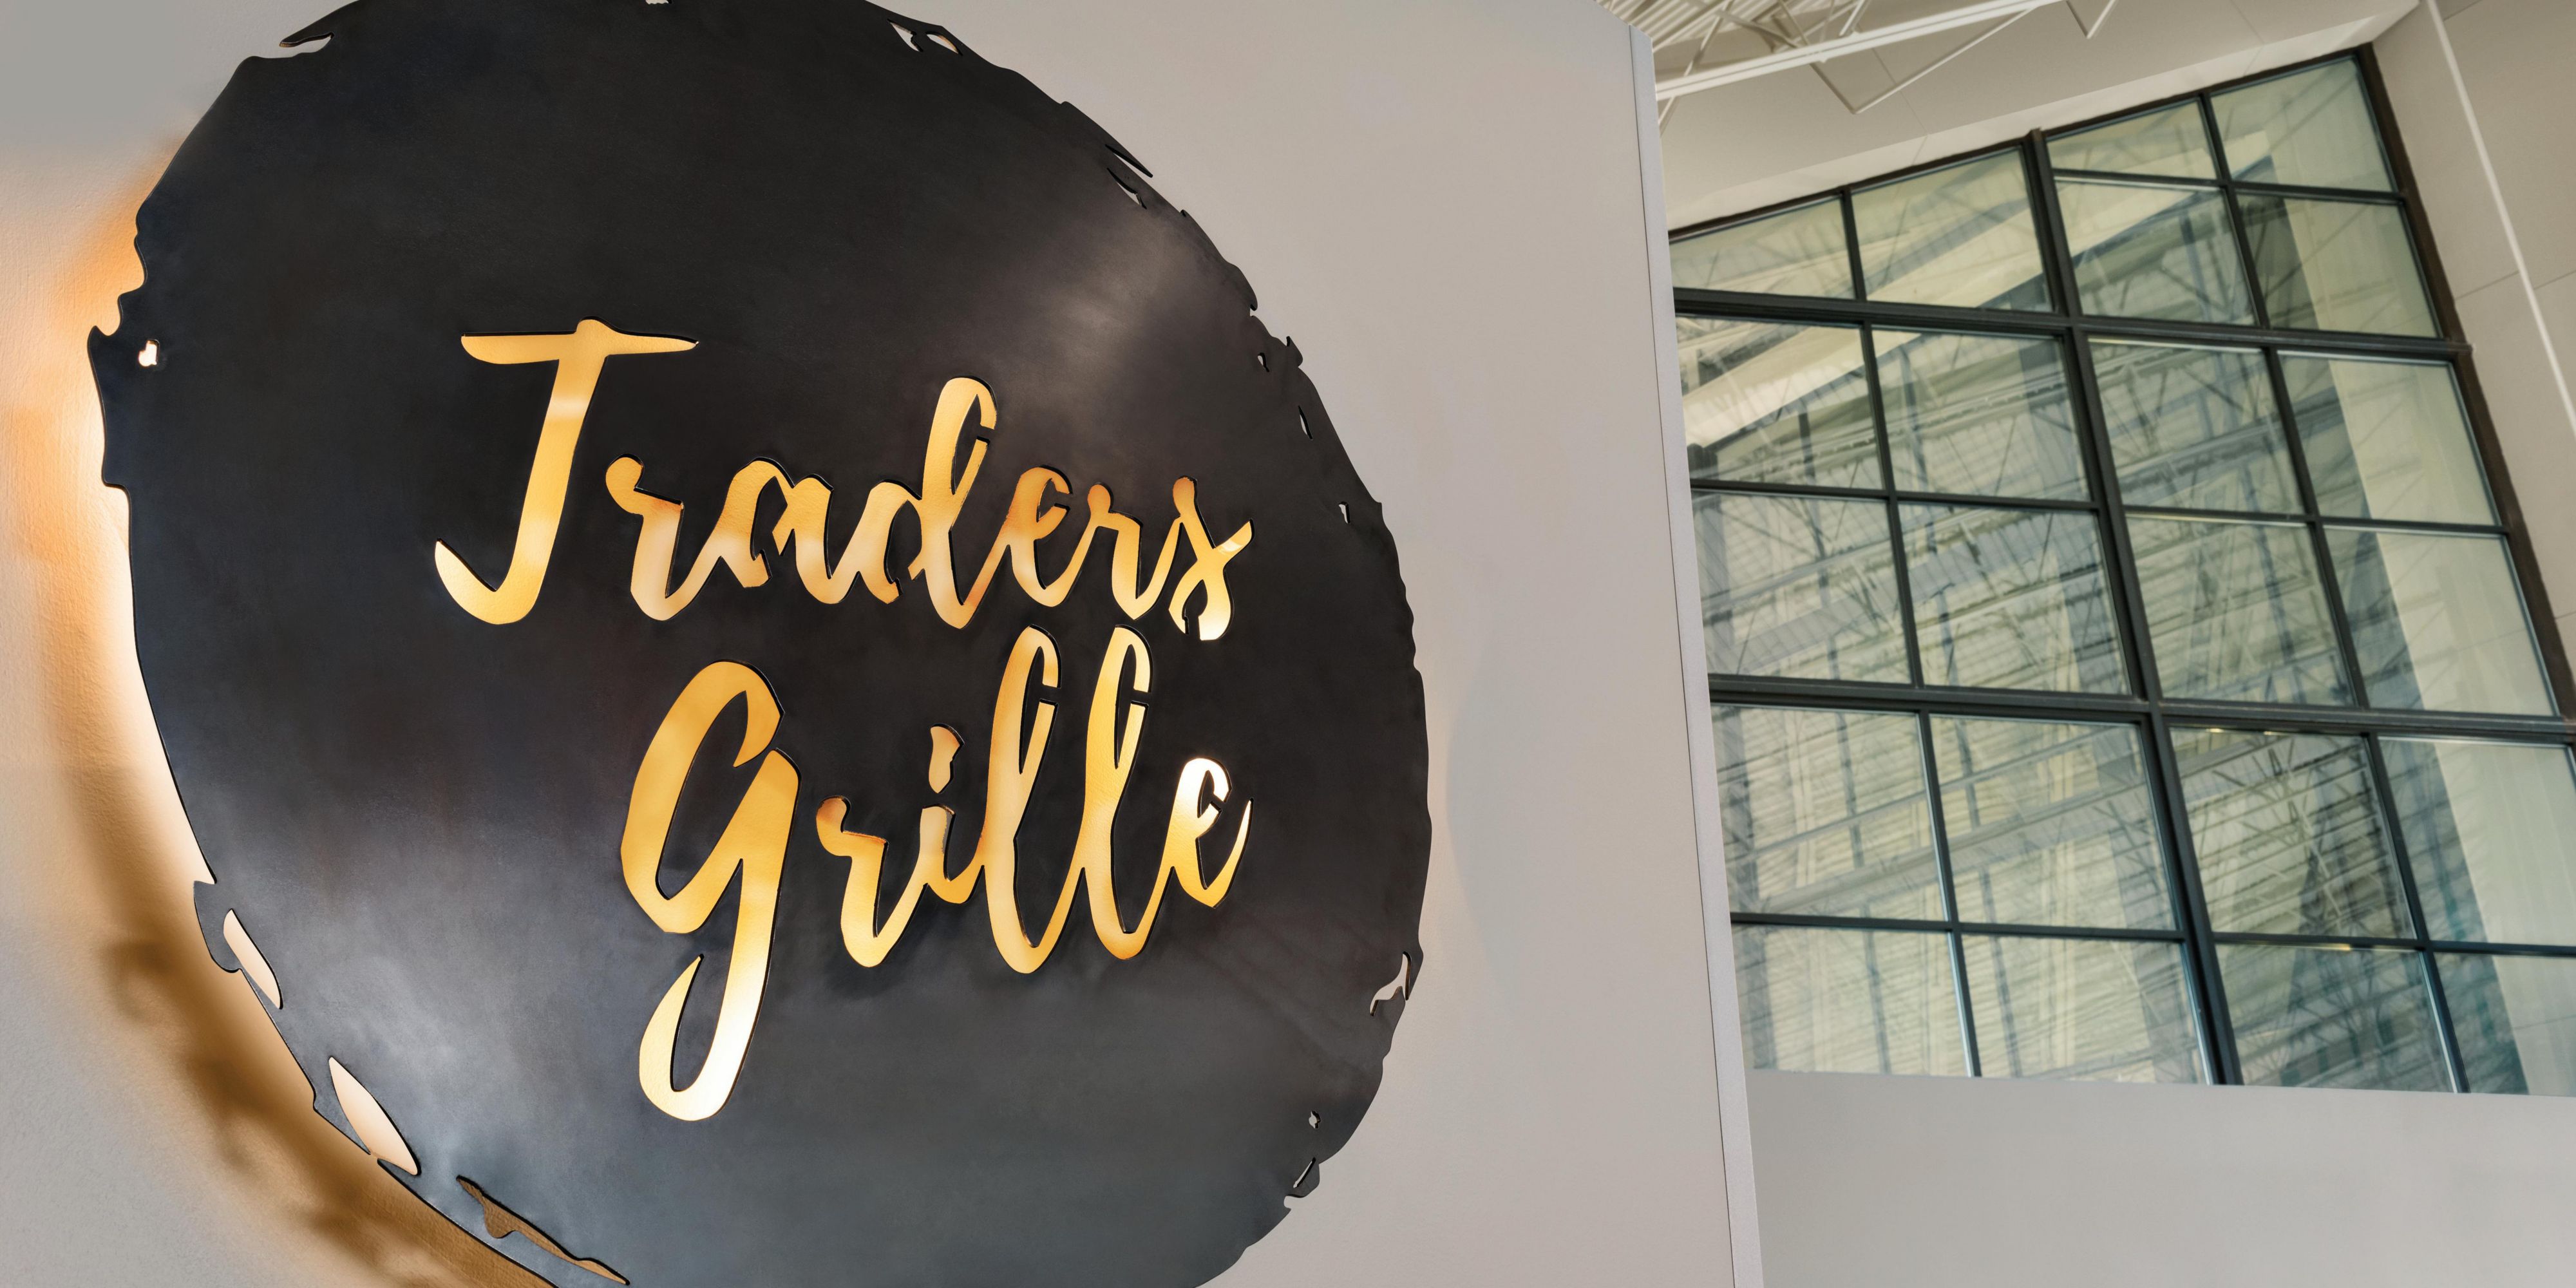 Traders Grille